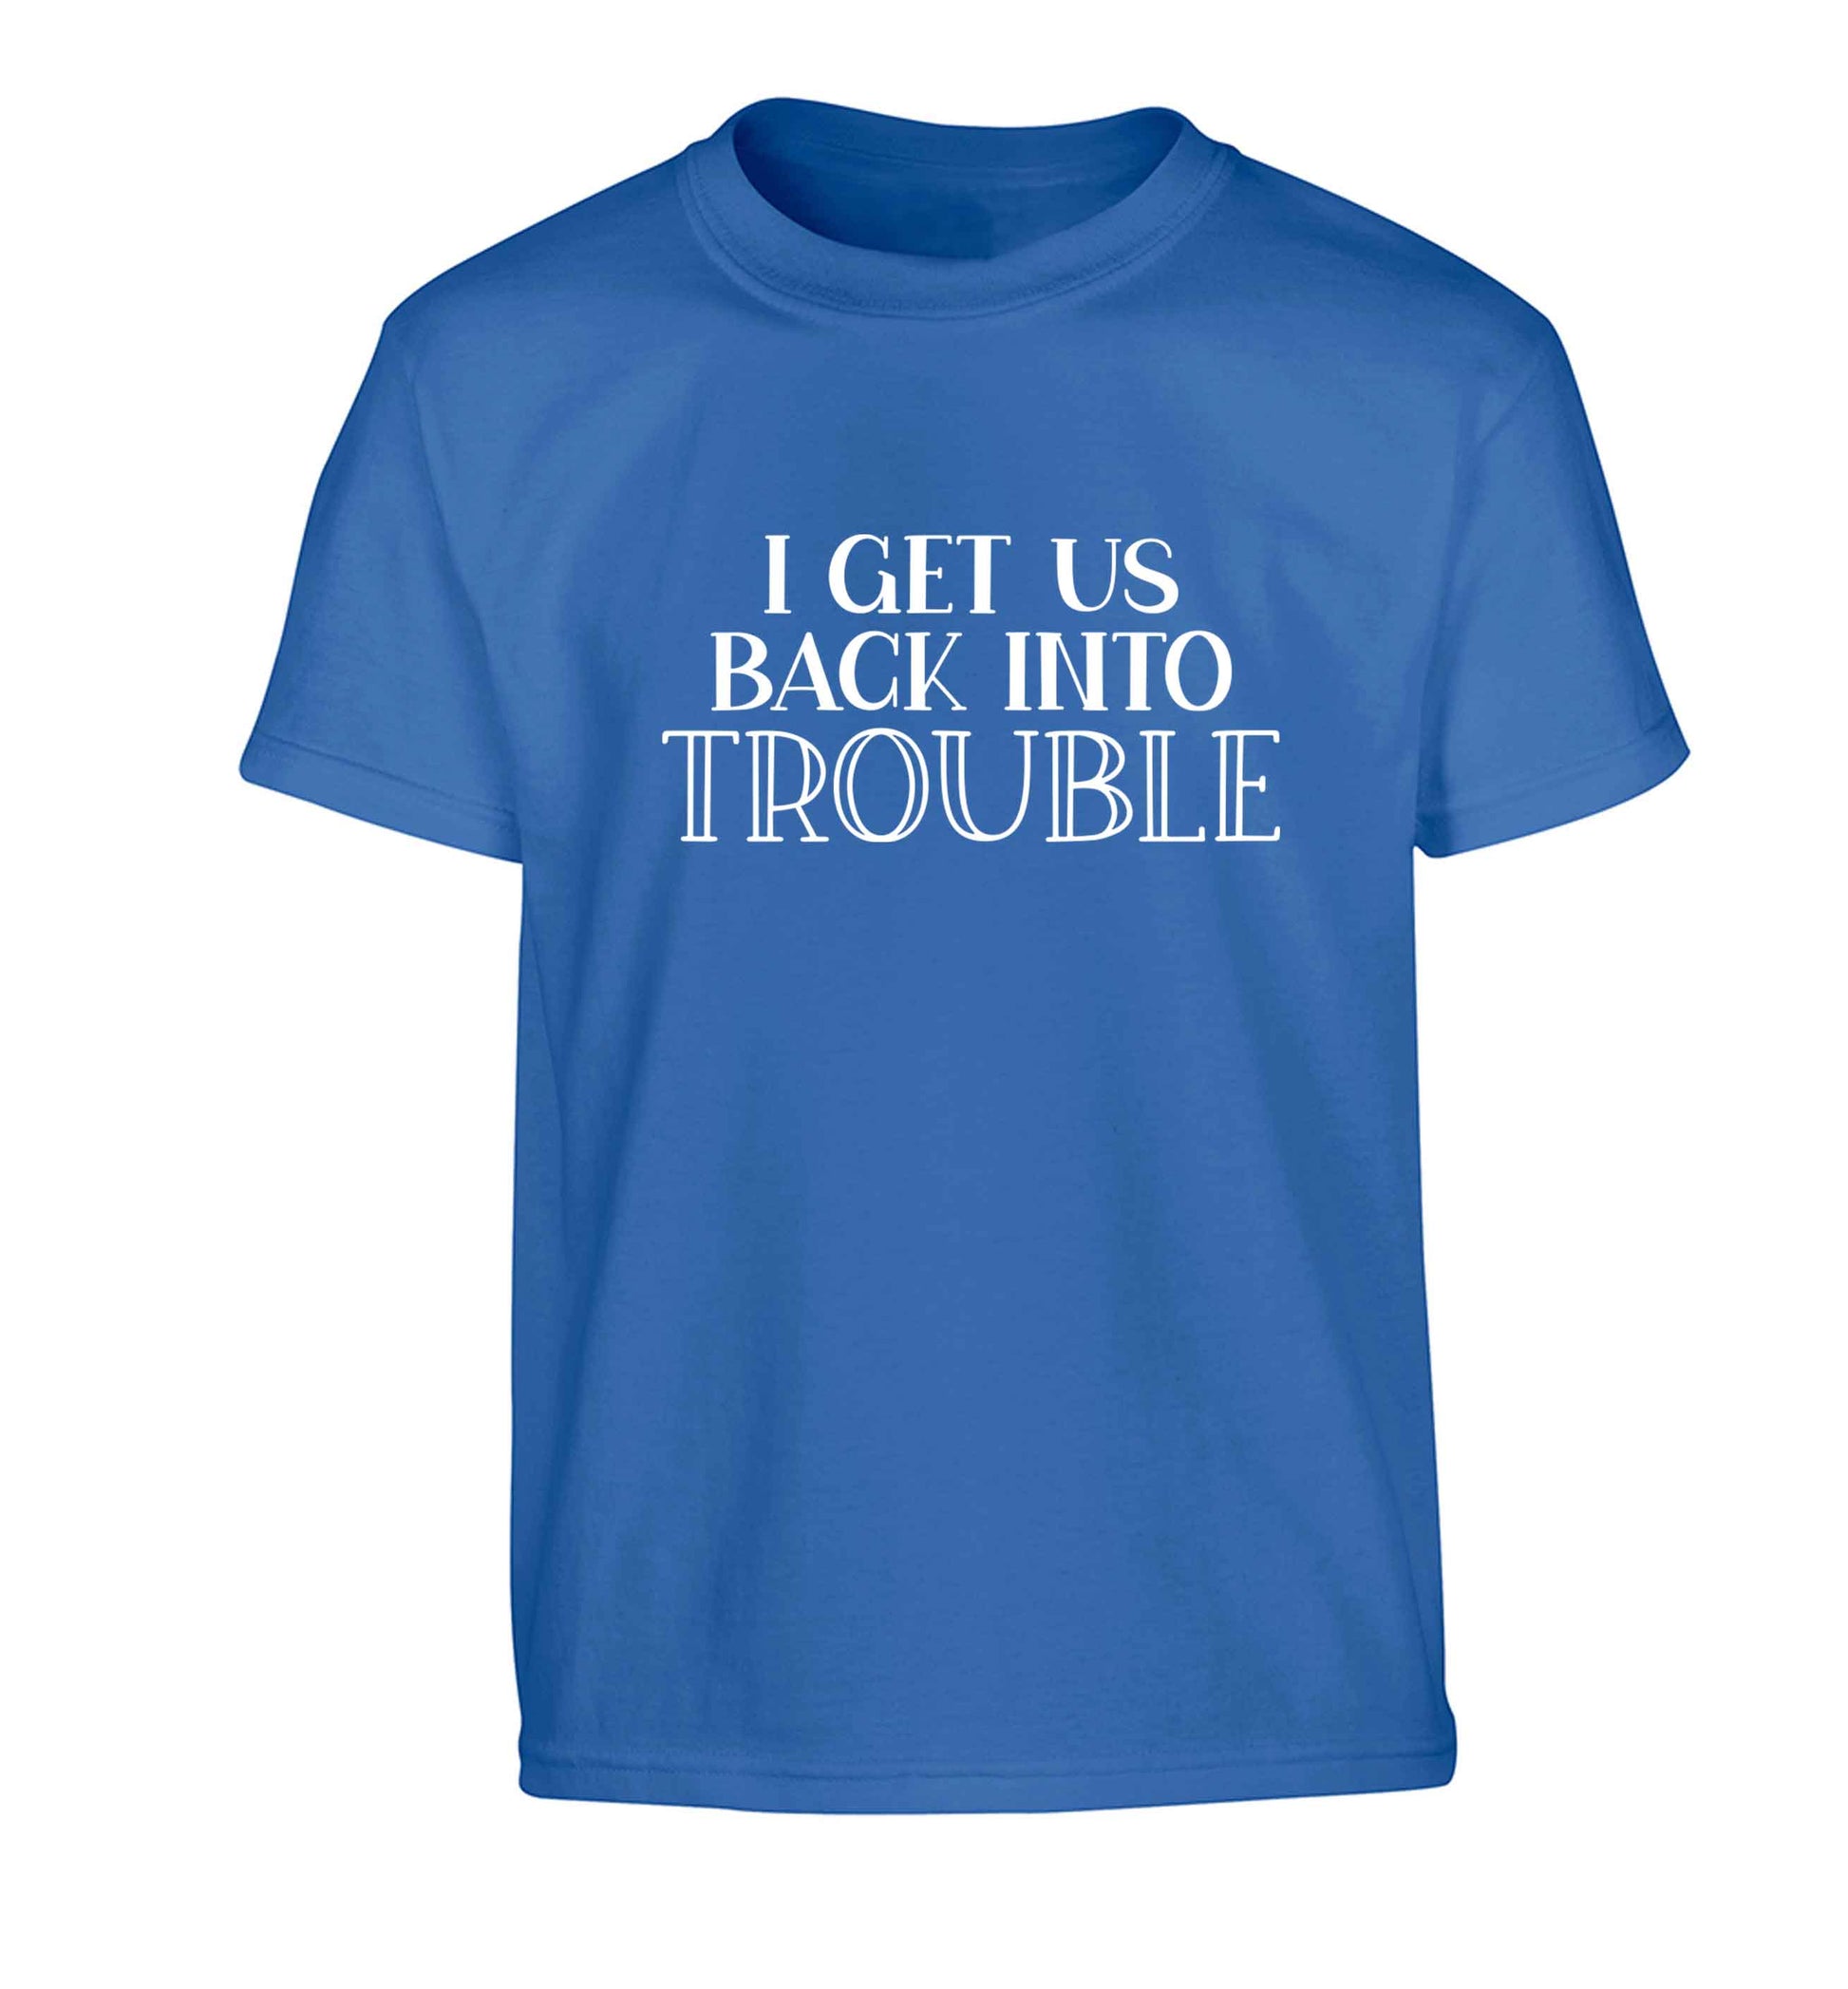 I get us back into trouble Children's blue Tshirt 12-13 Years